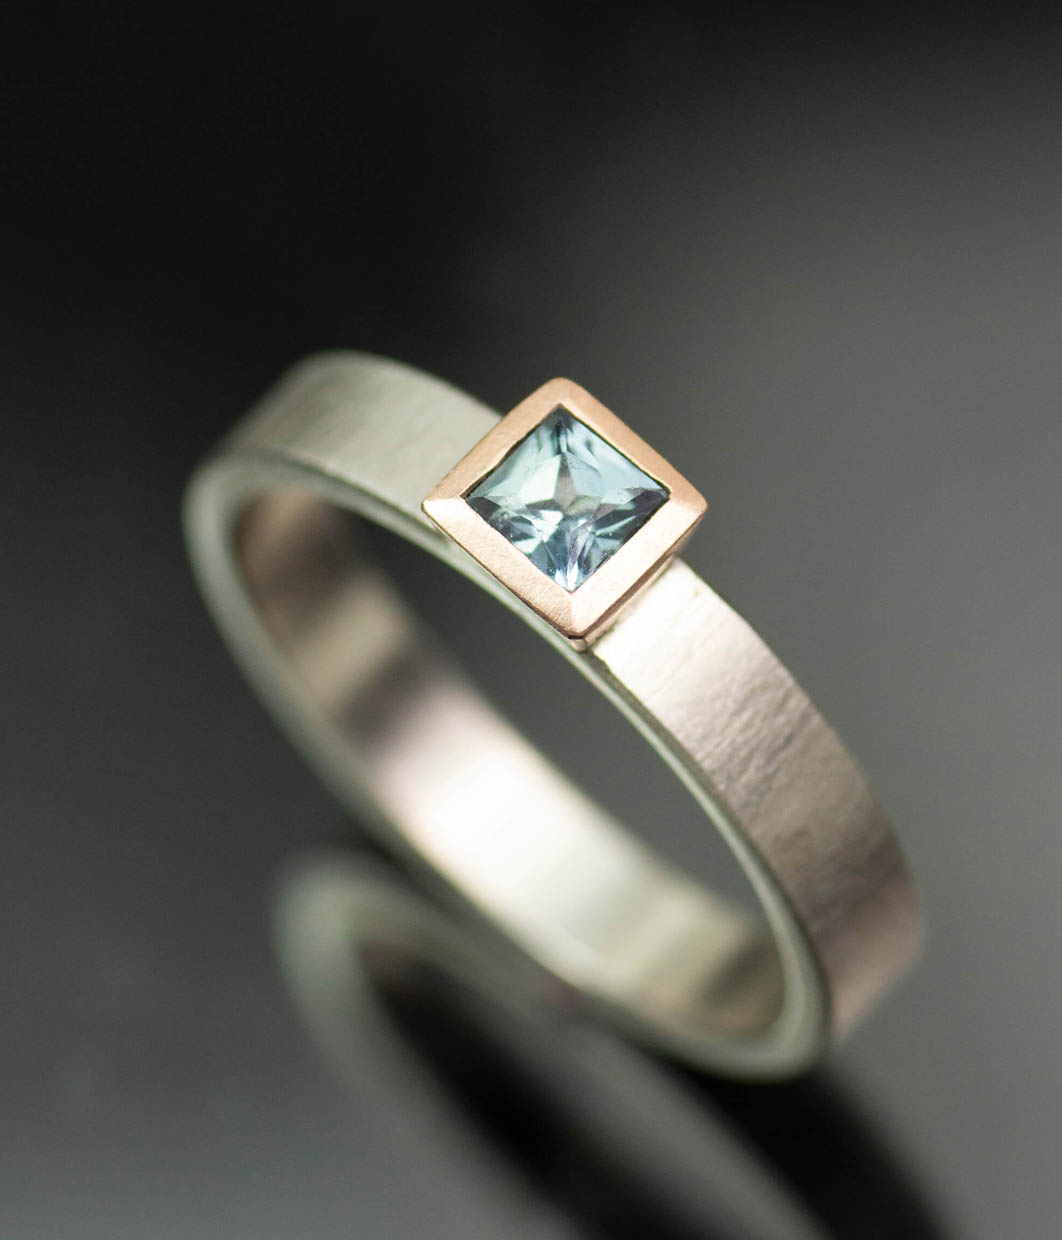 Lolide Seattle USA is a lesbian, gay, queer LGBTQIA+ wedding and engagement jeweler crafting this princess square teal sapphire rose gold ring